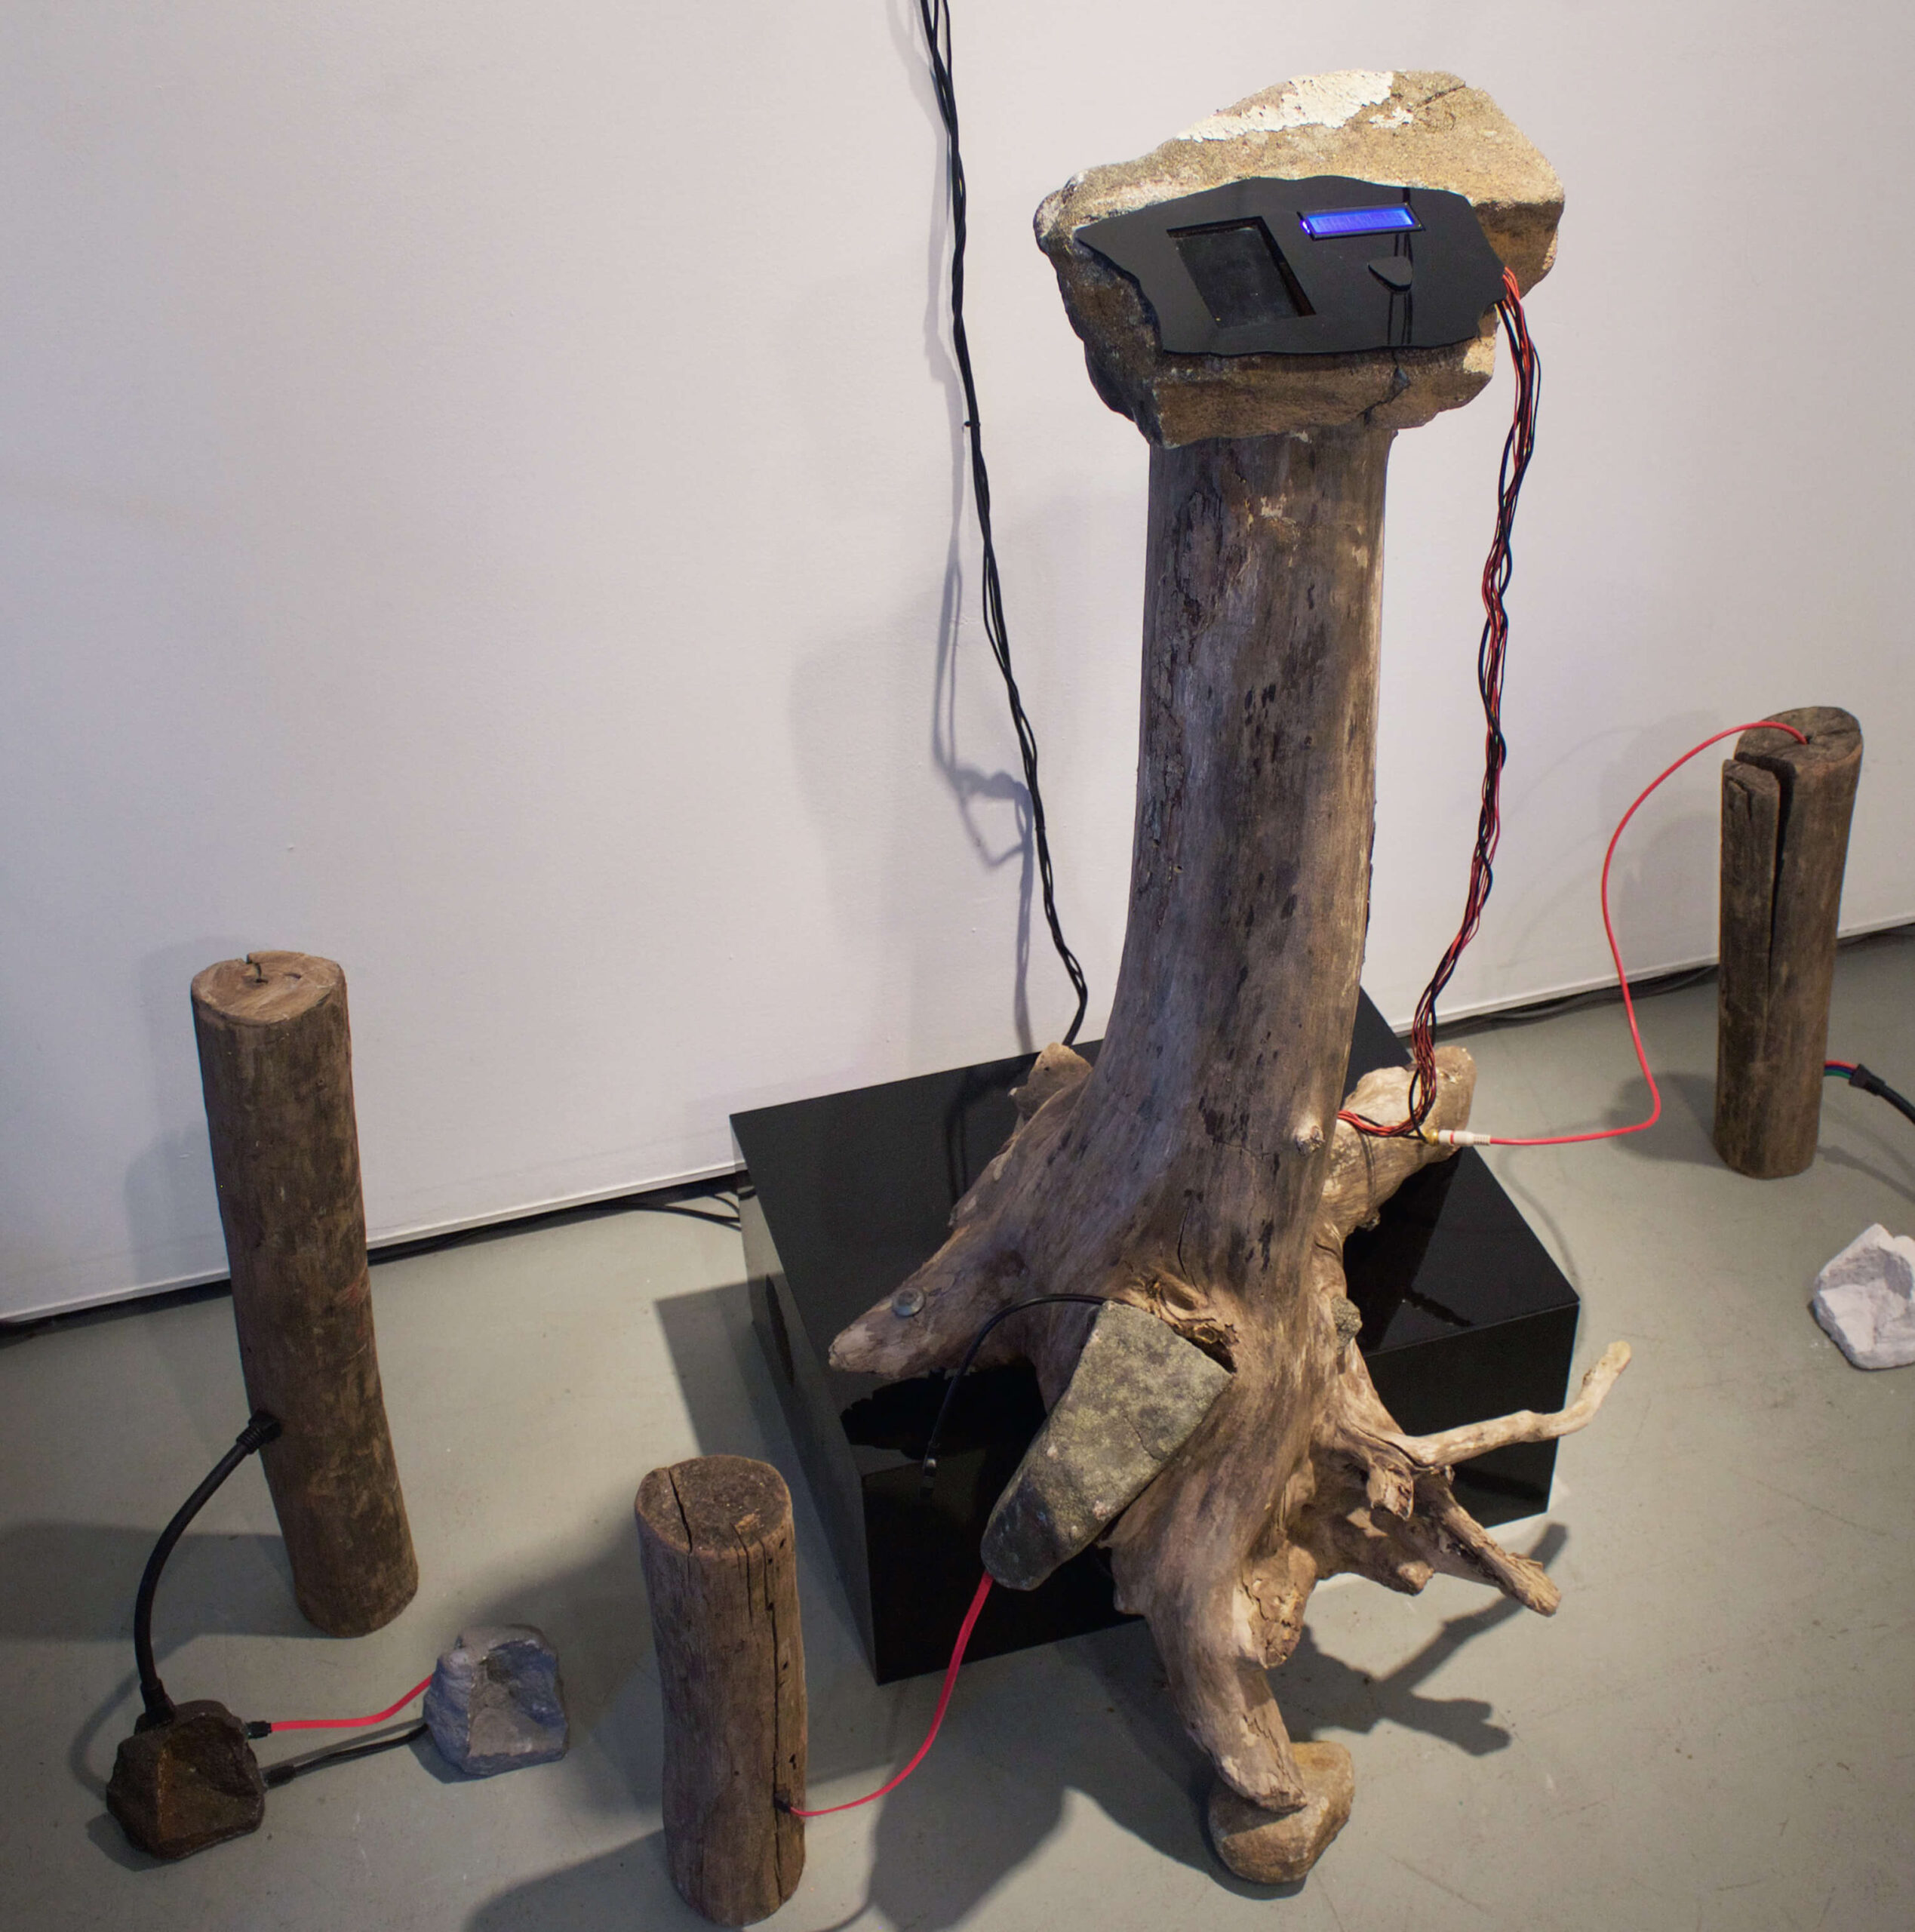 An interactive installation consisting of a tree trunk connected to smaller pieces of wood by a cable and controller device.